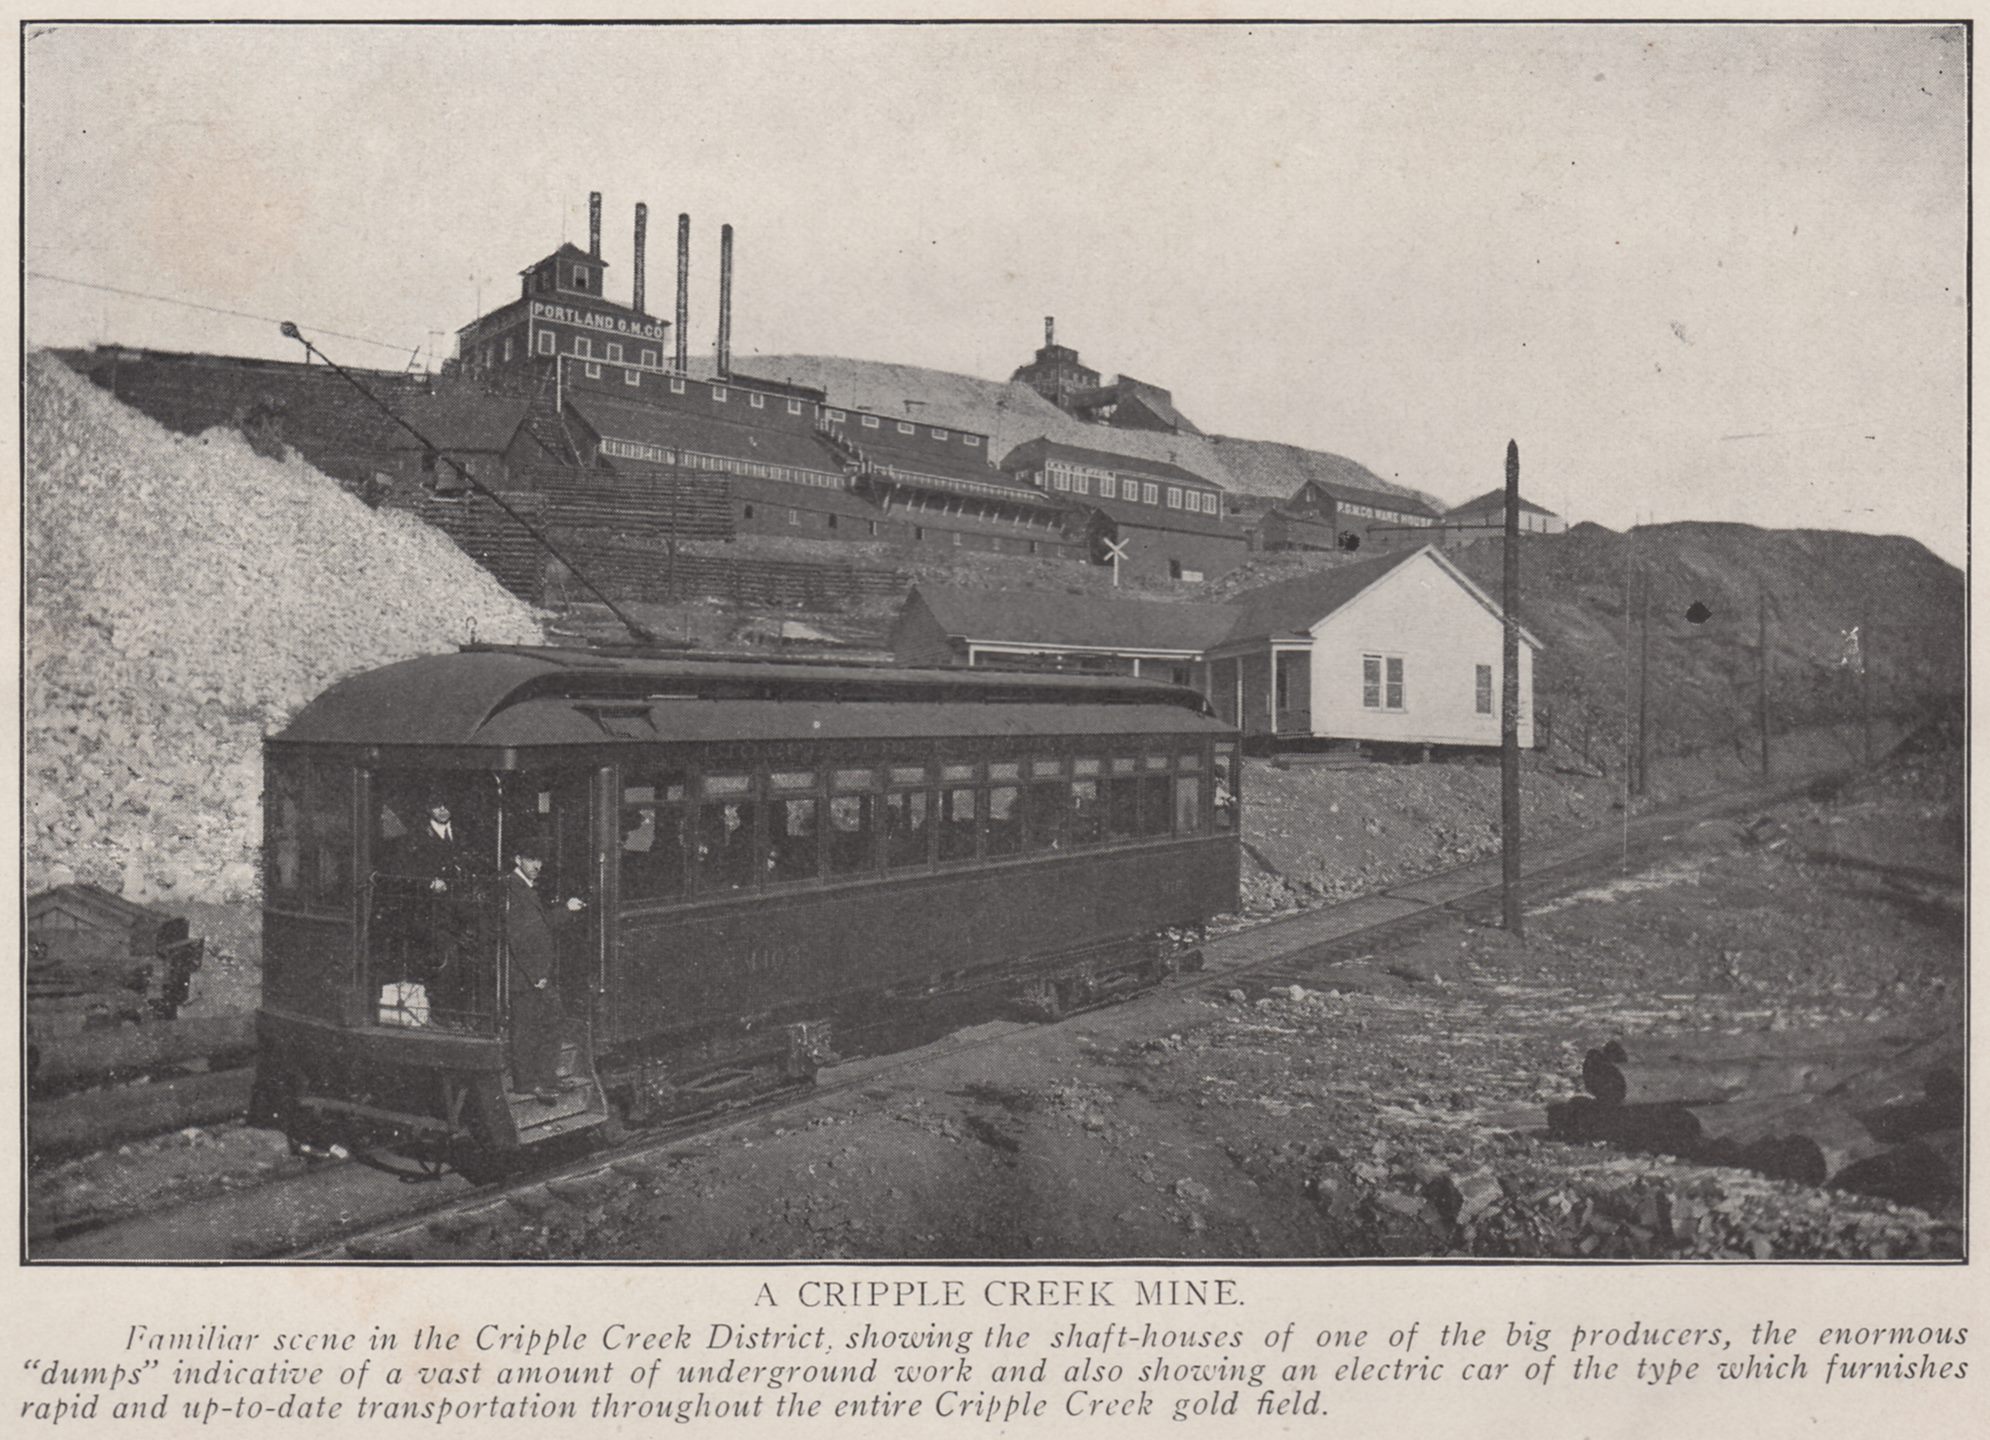    Familiar scene in the Cripple Creek District, showing the shaft-houses of one of the big producers, the enormous ''dumps'' indicative of a vast amound of underground work and also showing an electric car of the type which furnishes rapid and up-to-date transportation throughout the entire Cripple Creek gold field.
-> This is along the original High Line, just before it crosses over the M.T. mainline on its way down Battle Mountain. The mines in the background is the Portland Nos. 1 & 2.